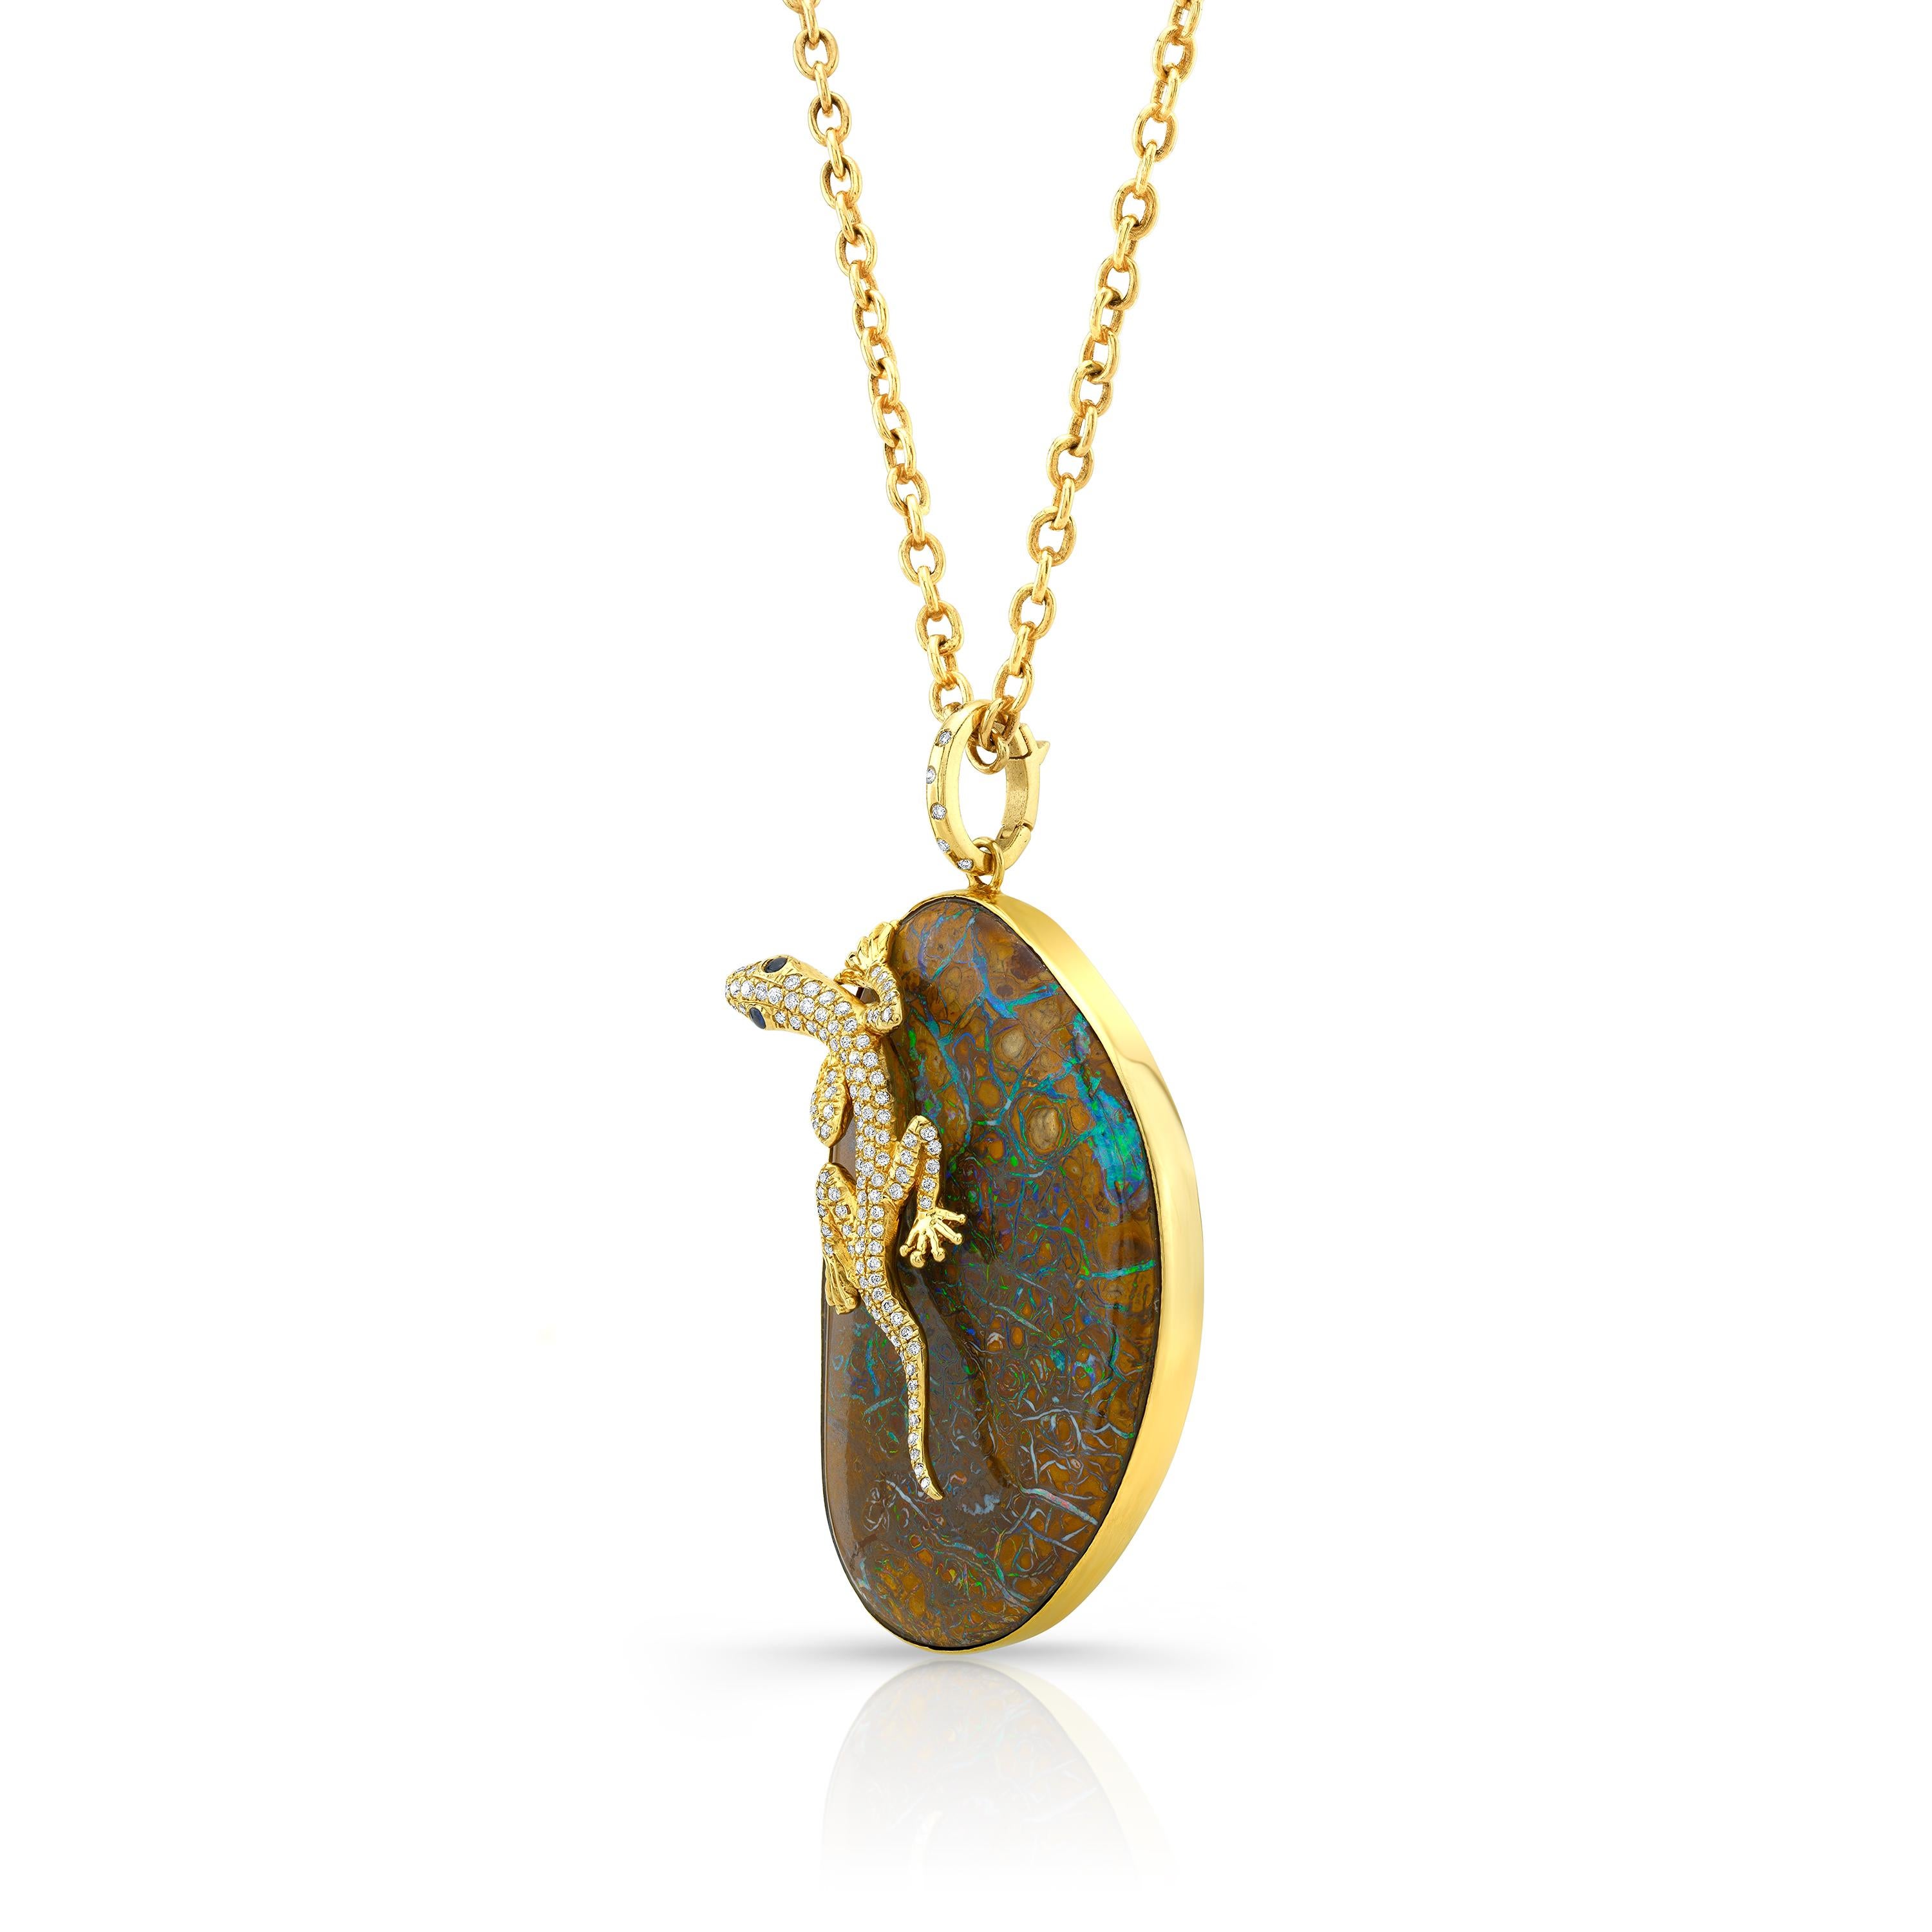 Amy Y’s 18K gold, opal, diamond and sapphire pendant necklace embraces the earth’s desert friends in this one-of-a-kind whimsical gecko Rex.  Colors of the rainbow light up this Australian boulder opal, gold and diamond detailed gecko.  Handmade by